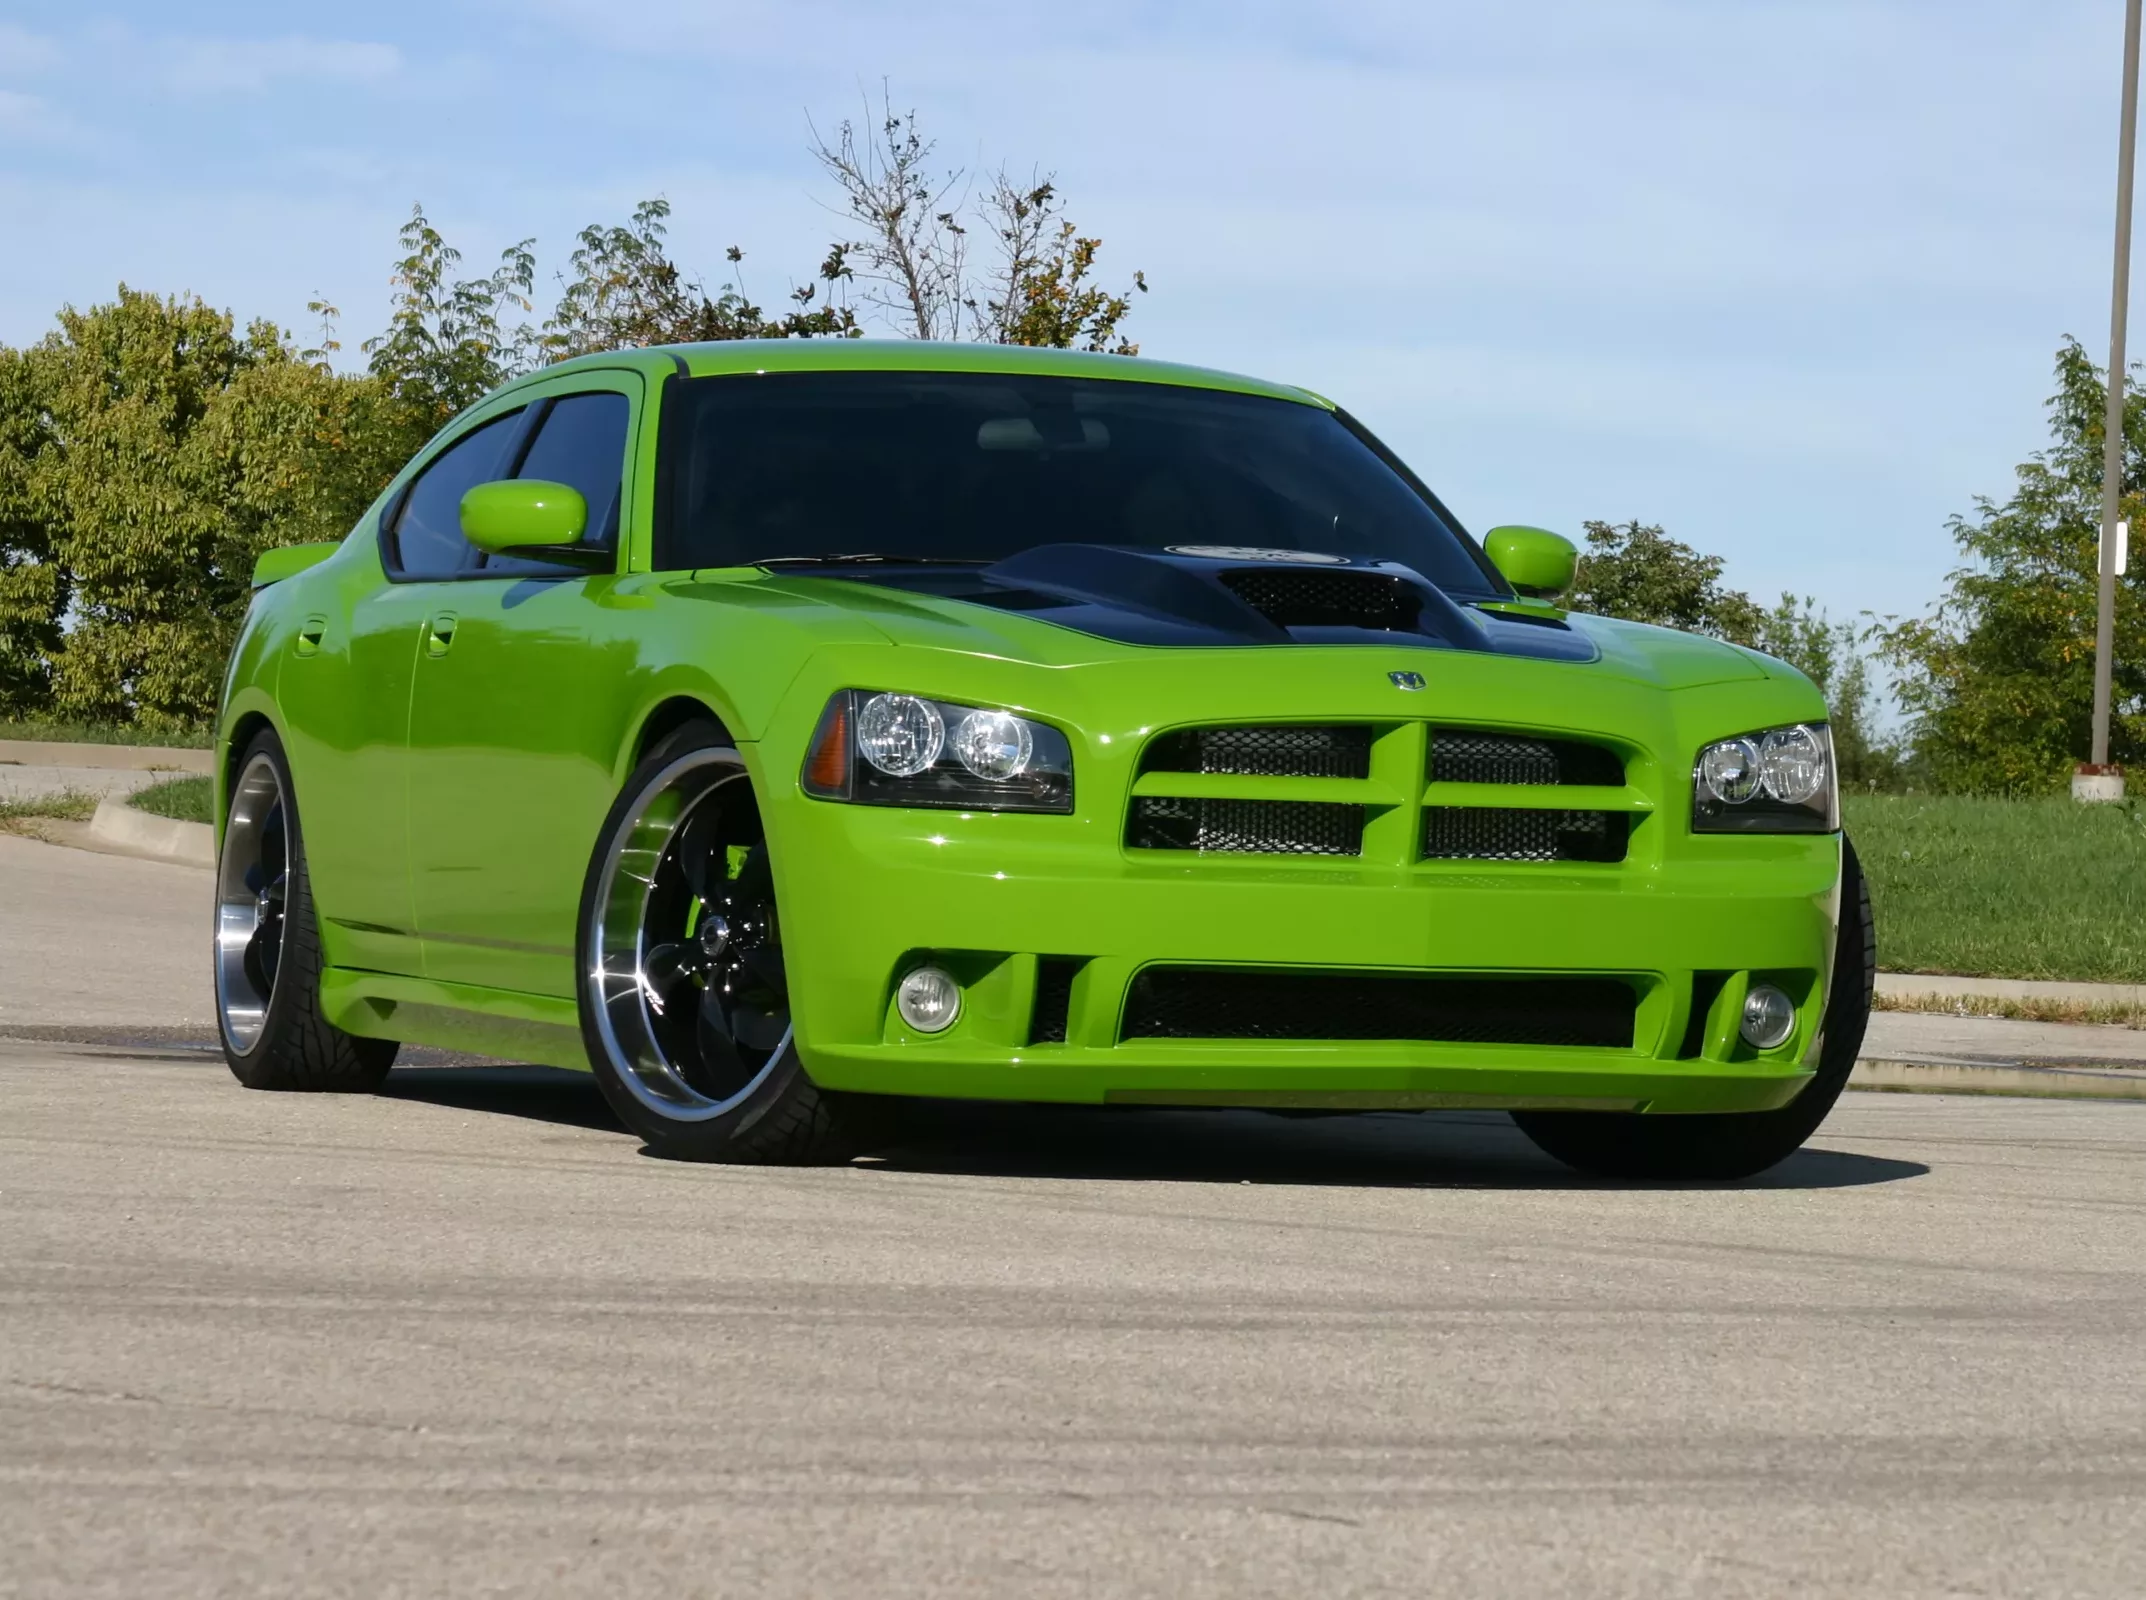 2007 Dodge Charger R/T (5.7) ProCharged Green Exterior